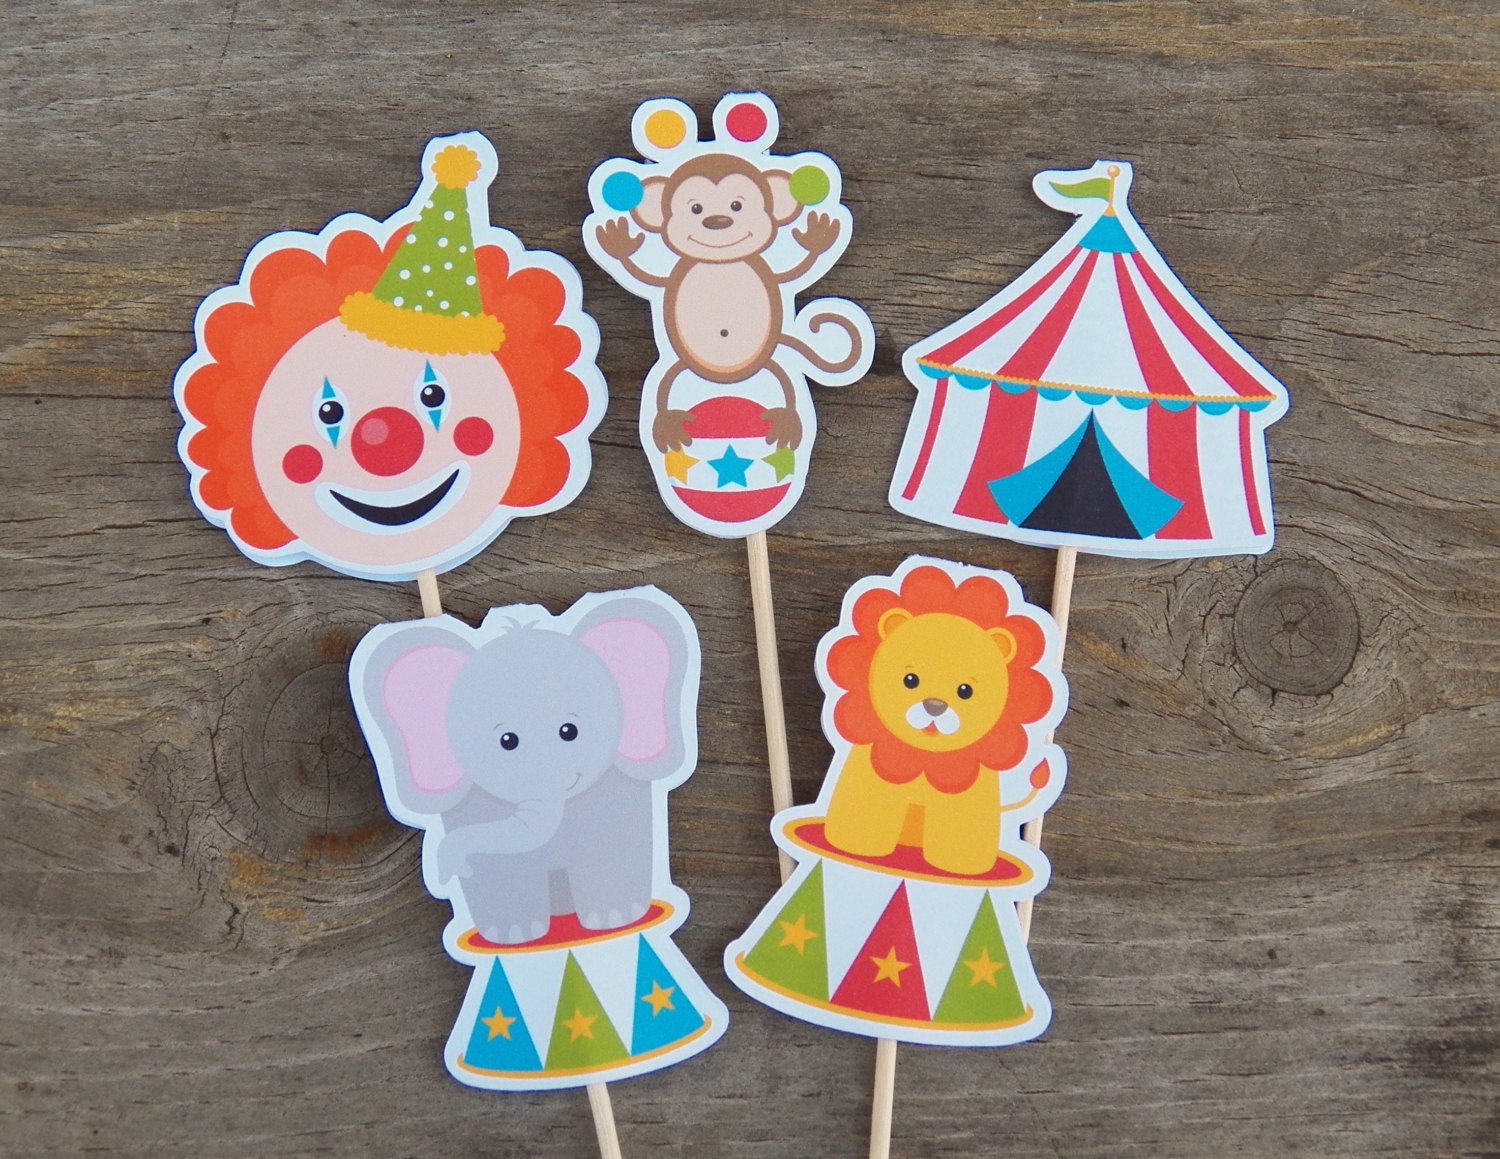 Circus Party - Set of 36 Assorted Big Top Circus Cupcake Toppers by The Birthday House